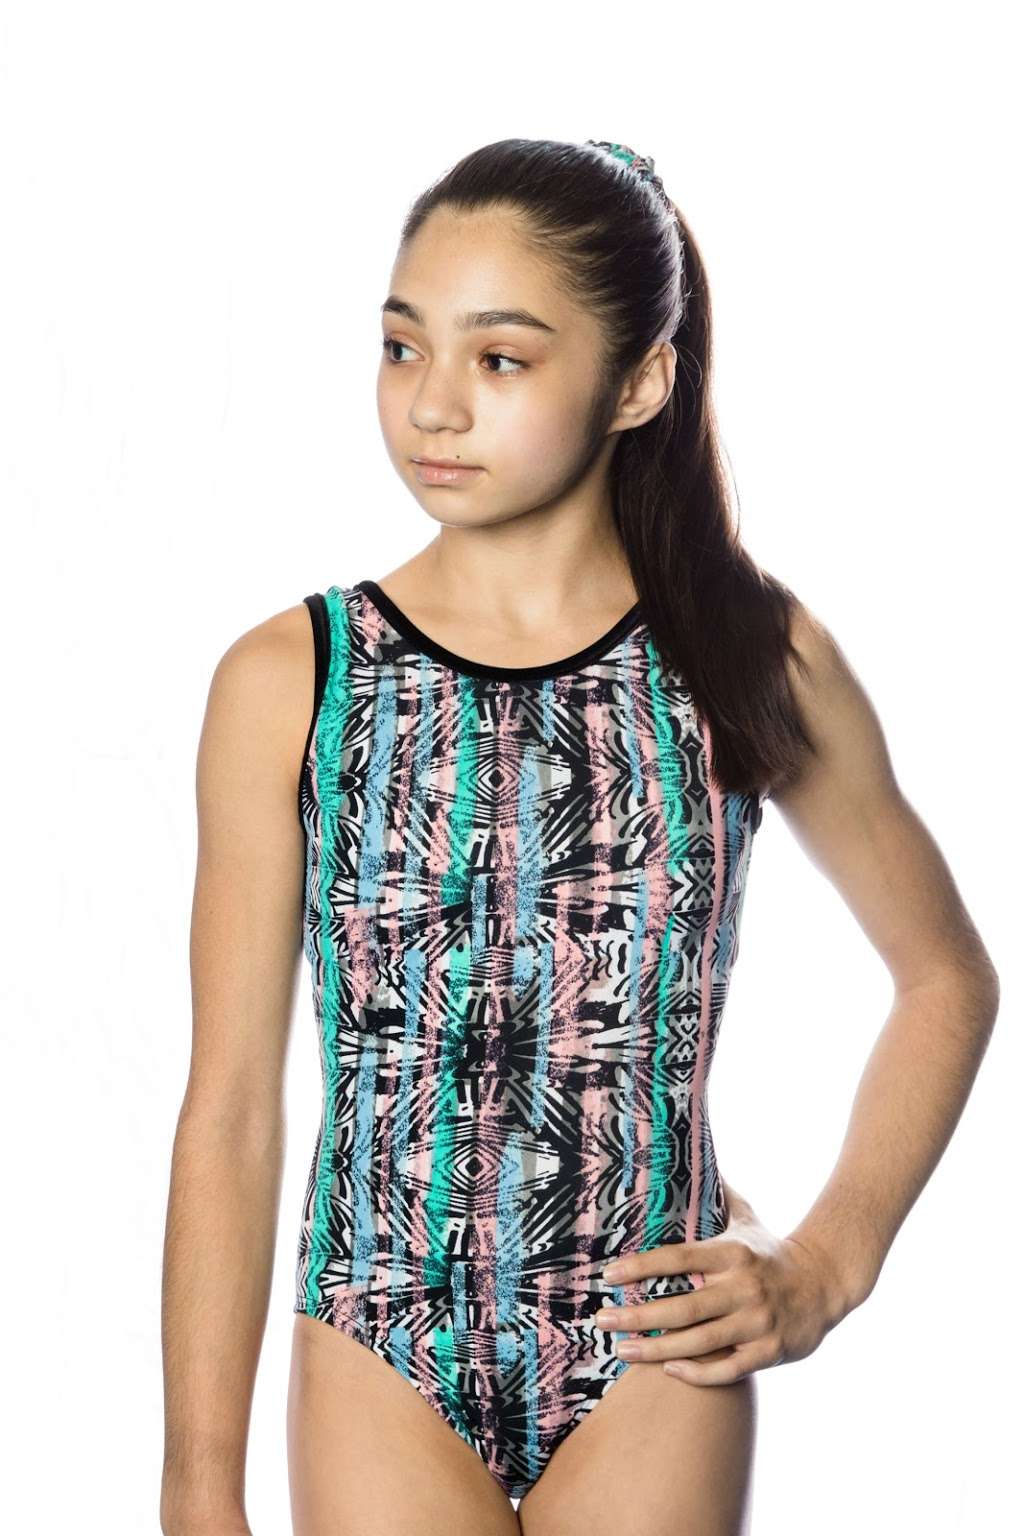 Rebeccas Mom Leotards | 7644 Bellaire Ave, North Hollywood, CA 91605, USA | Phone: (888) 289-2536